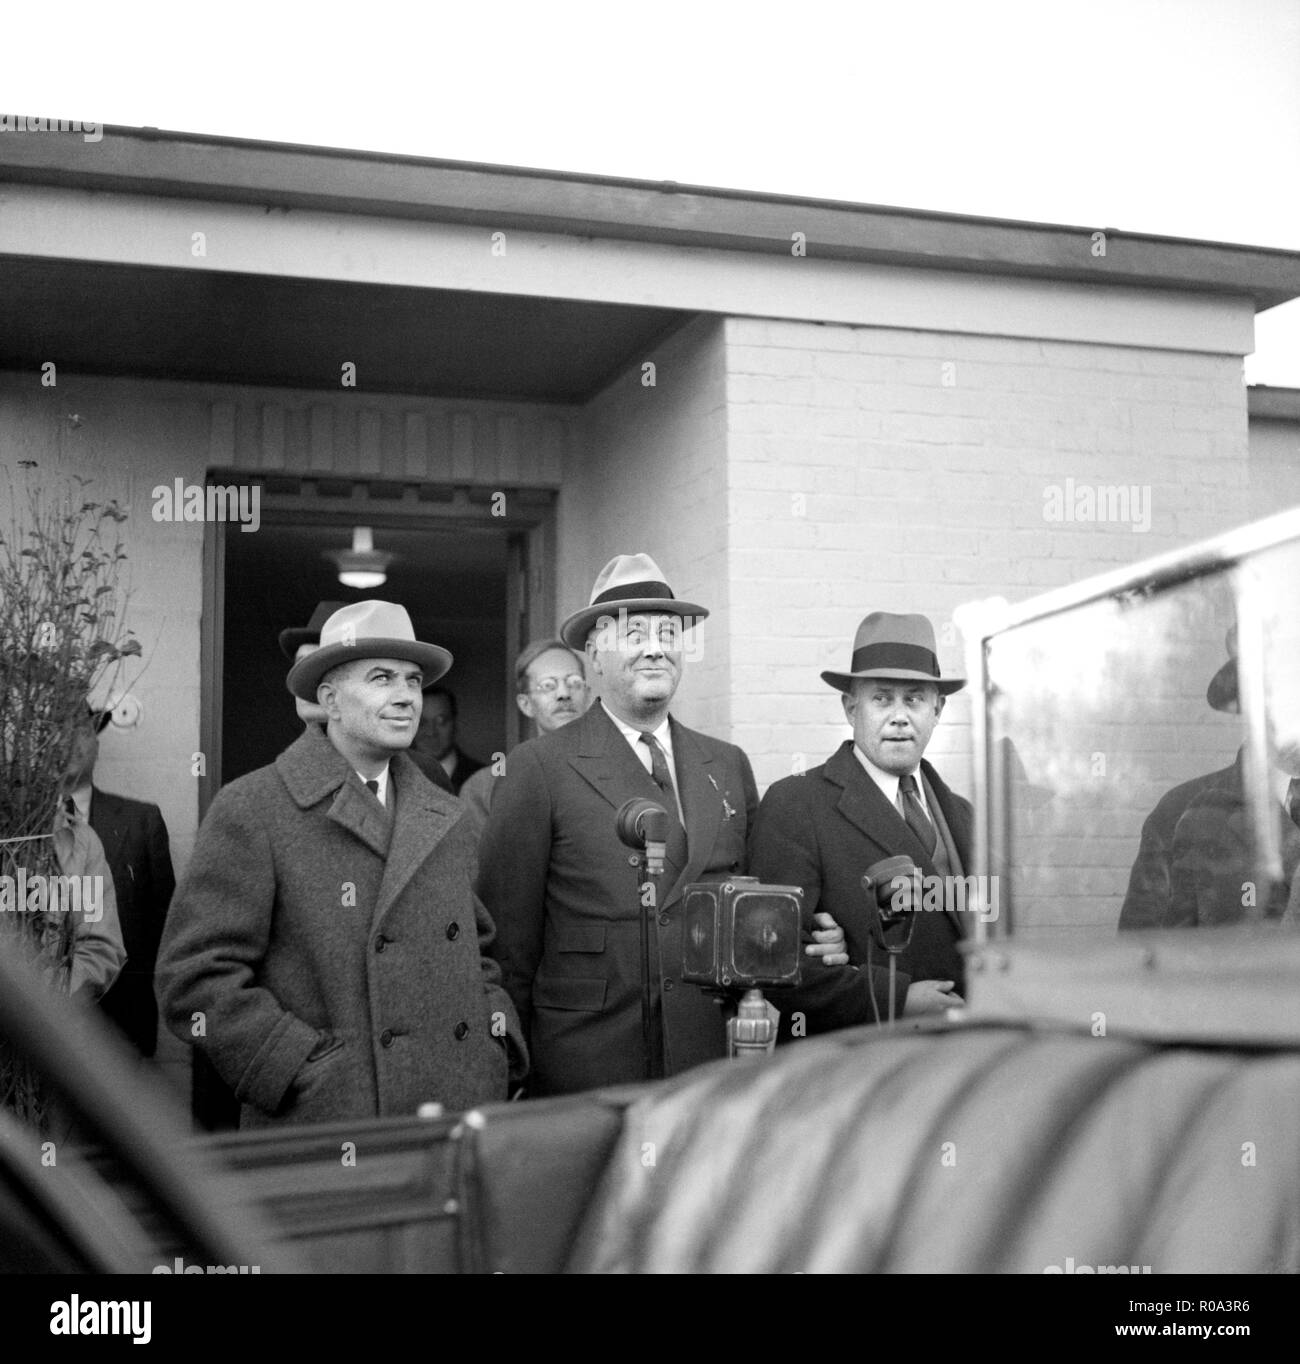 U.S. President Franklin Roosevelt with Resettlement Adminstration Head Rexford G. Tugwell (to Roosevelt's Right), at new Cooperative Housing Development, Greenbelt, Maryland, USA, Arthur Rothstein, Farm Security Administration, November 13, 1936 Stock Photo